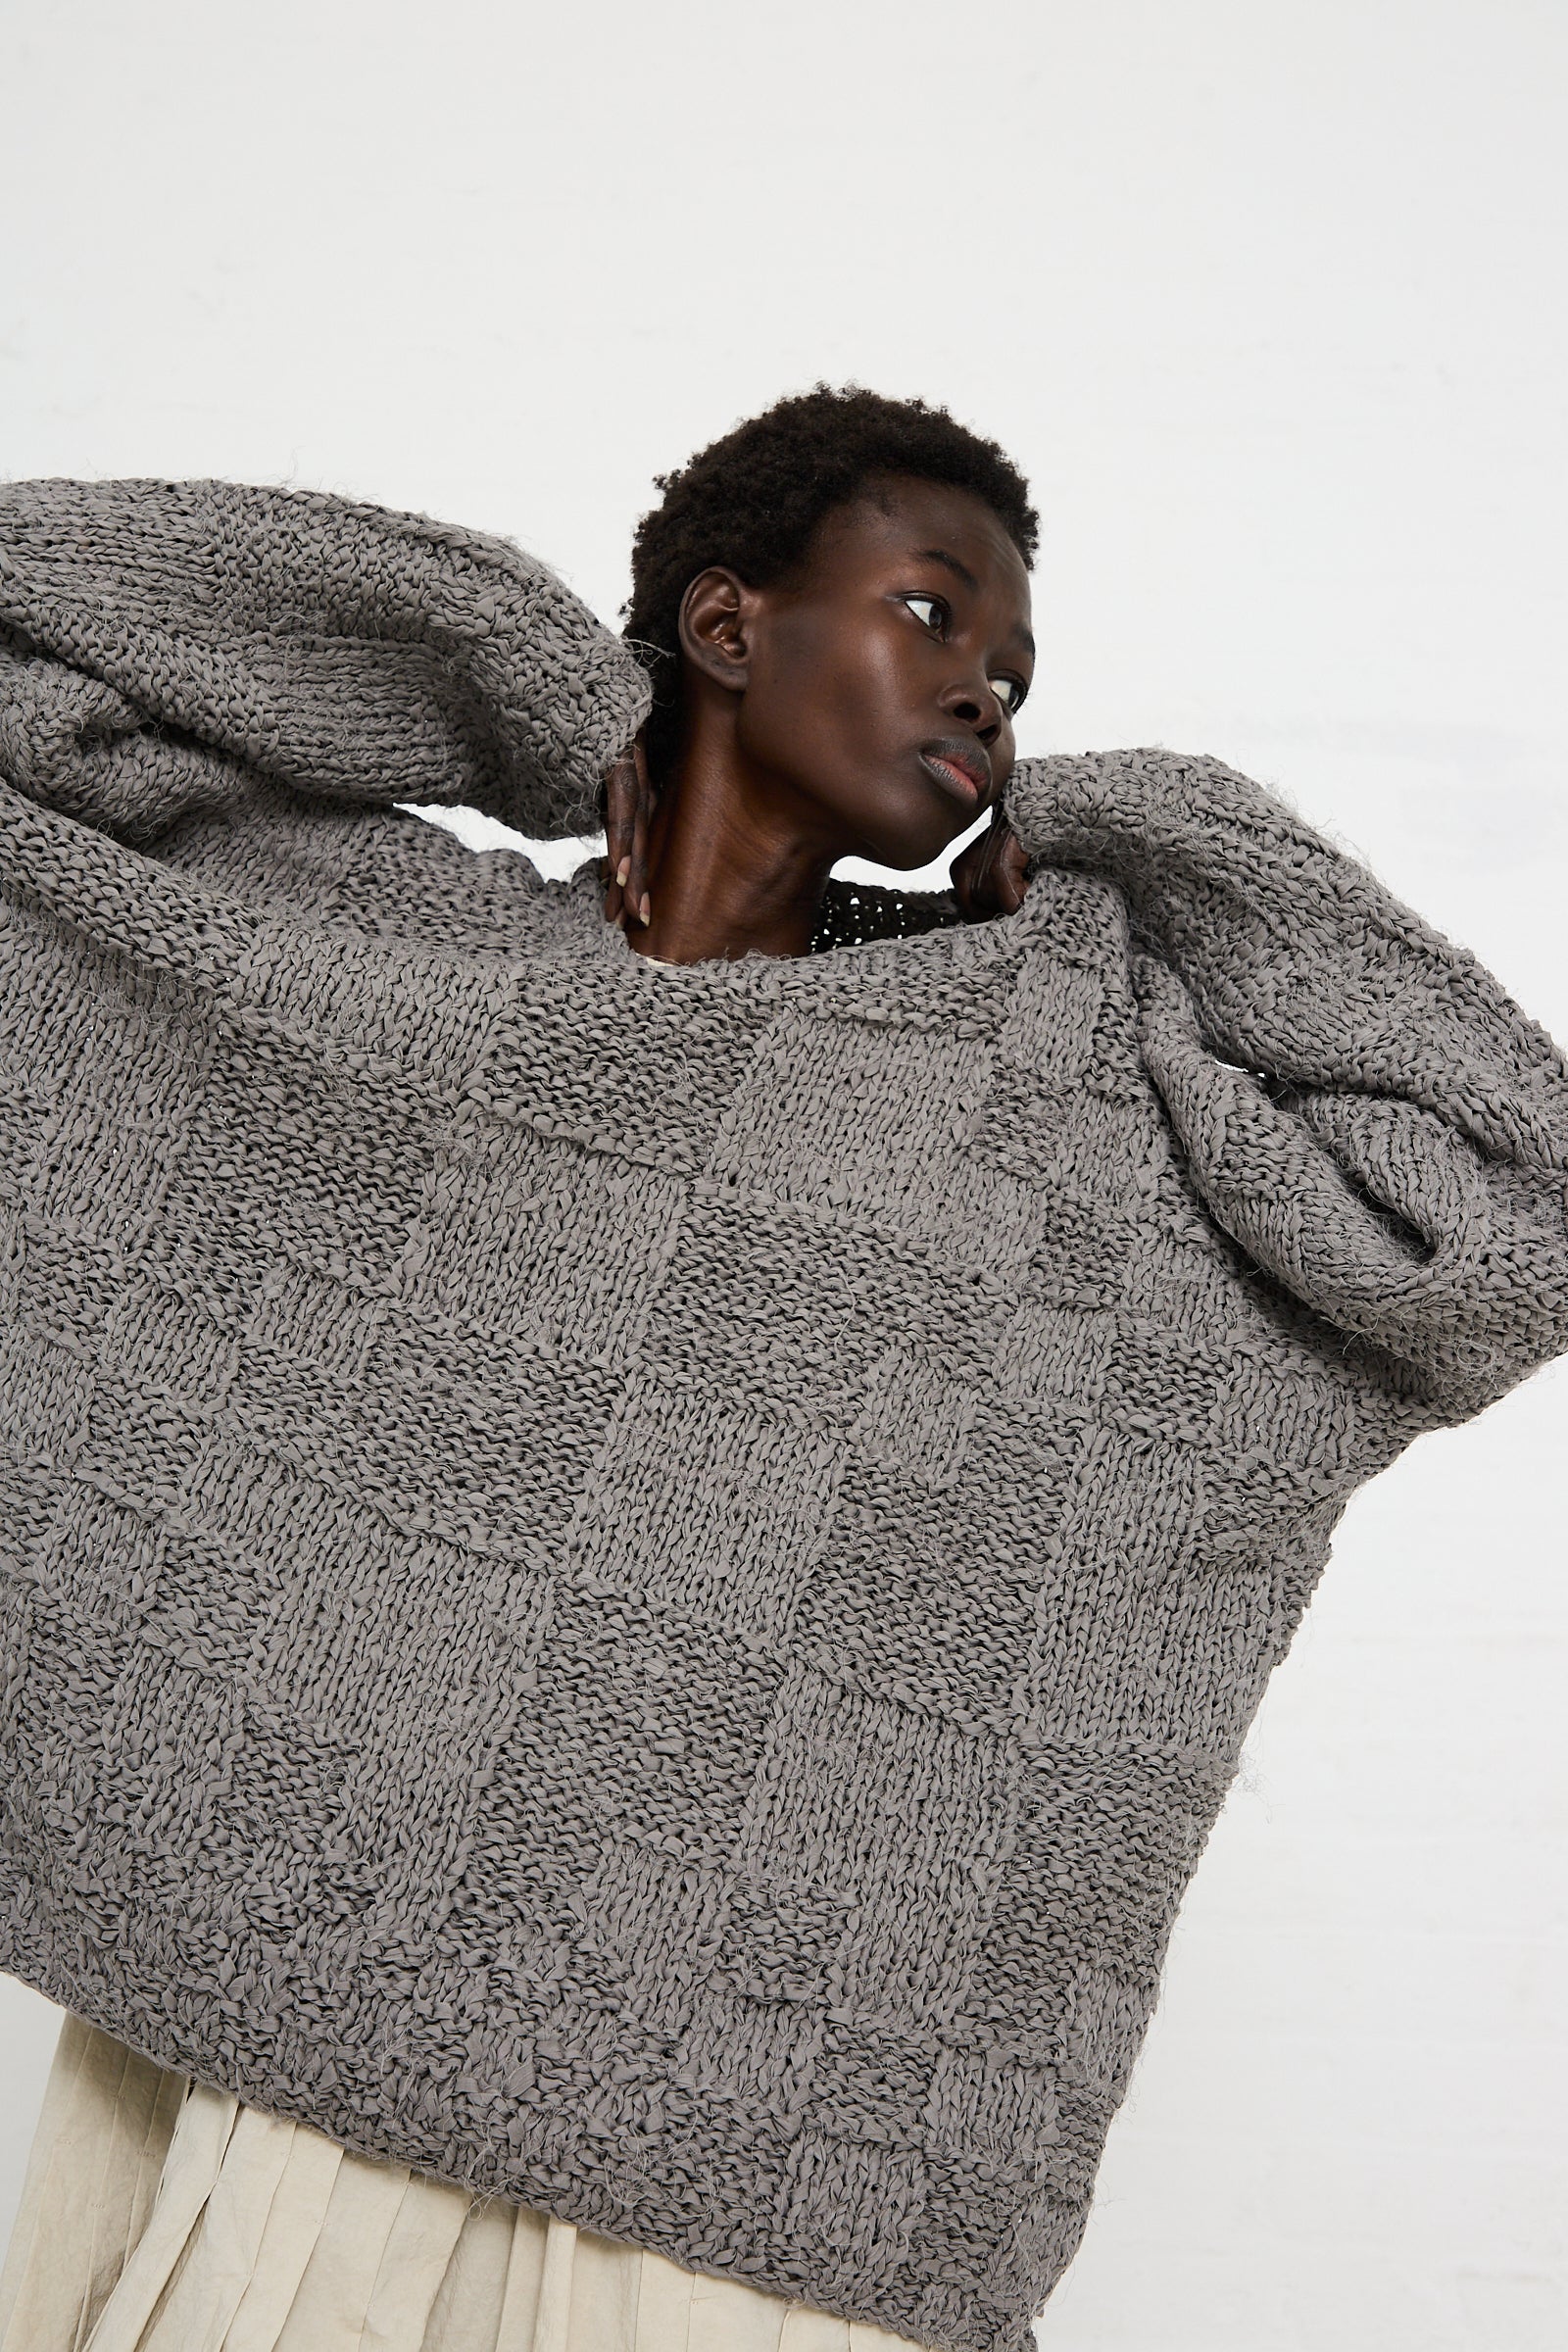 Person wearing a Handknit Pullover Sweater in Gris by Lauren Manoogian with a relaxed fit and textured pattern, paired with an off-white skirt, poses with arms lifted against a plain white background.